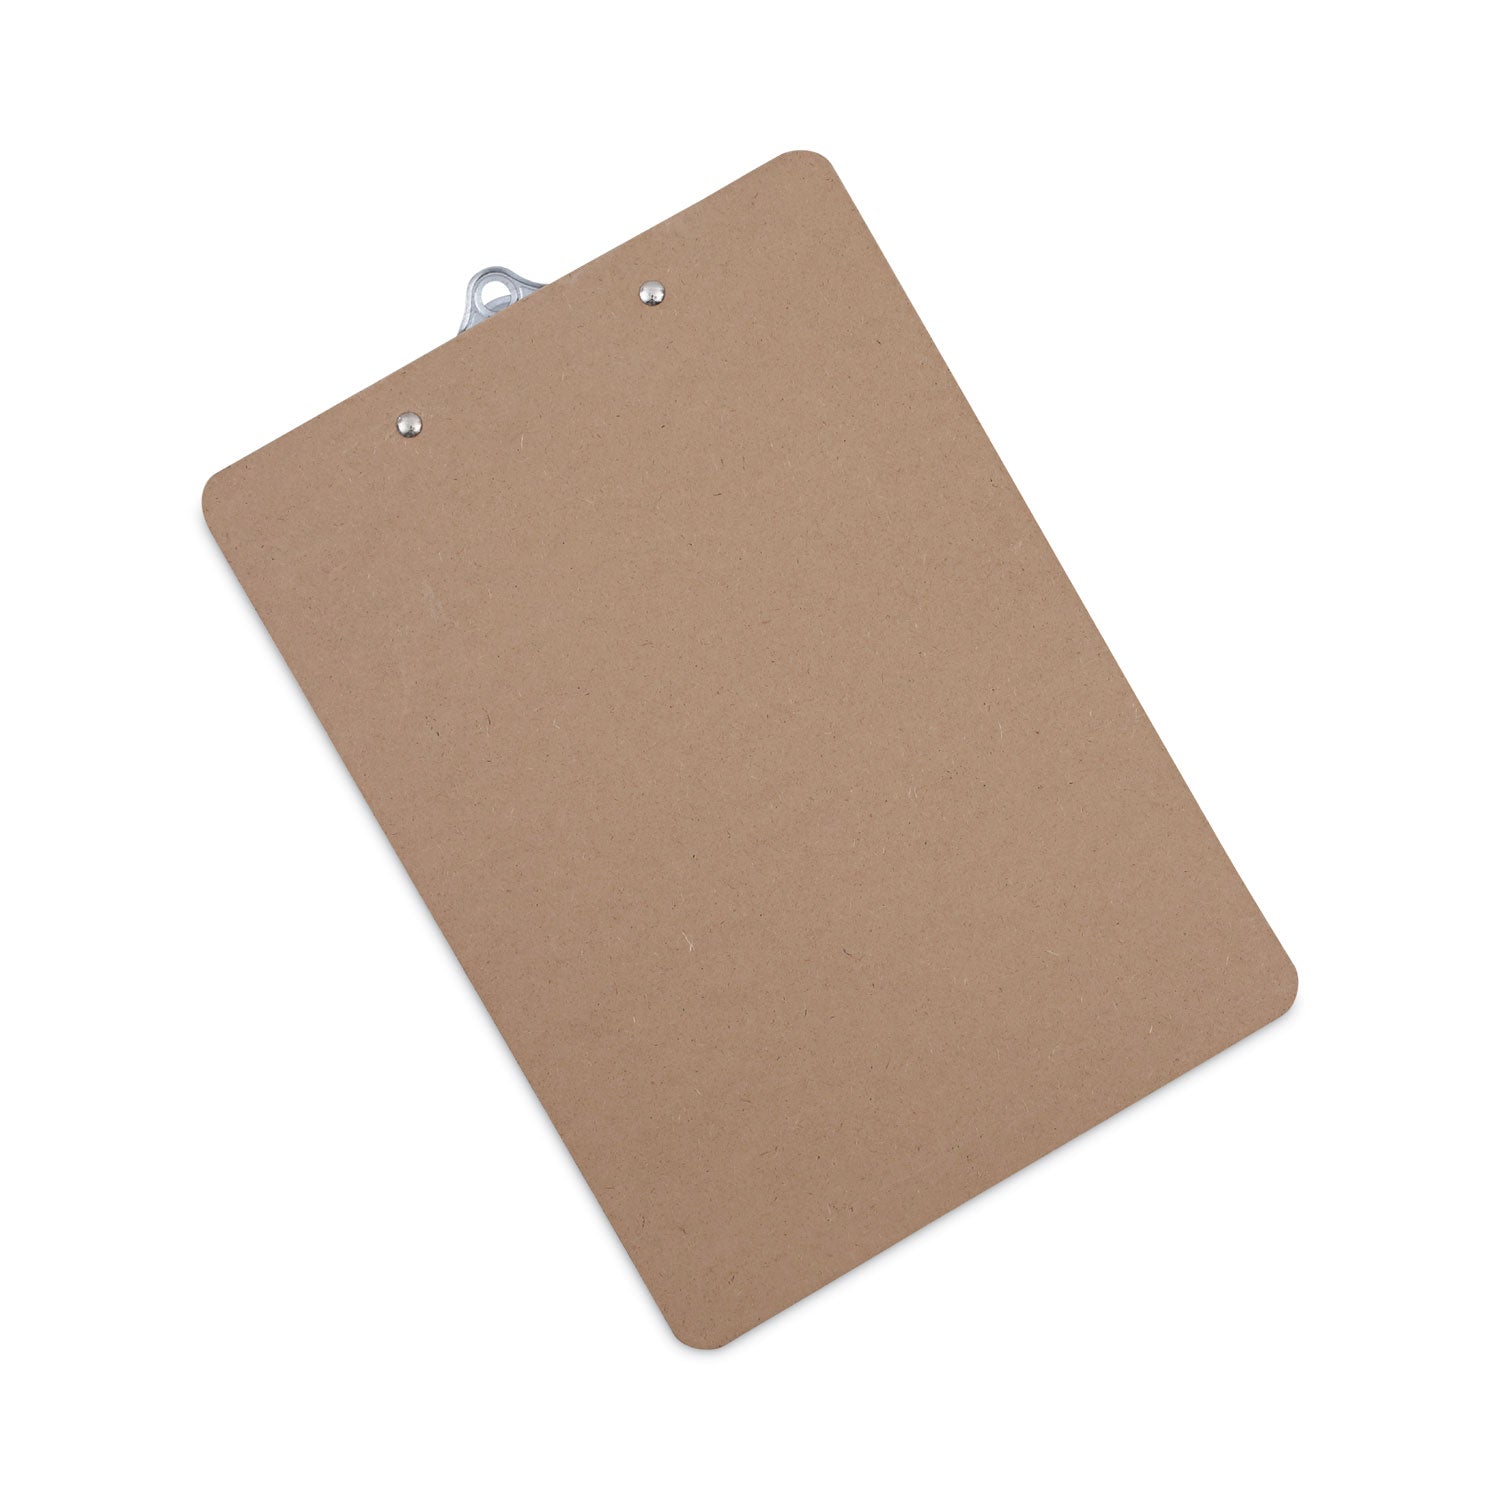 hardboard-clipboard-125-clip-capacity-holds-85-x-11-sheets-brown-3-pack_unv40304vp - 7